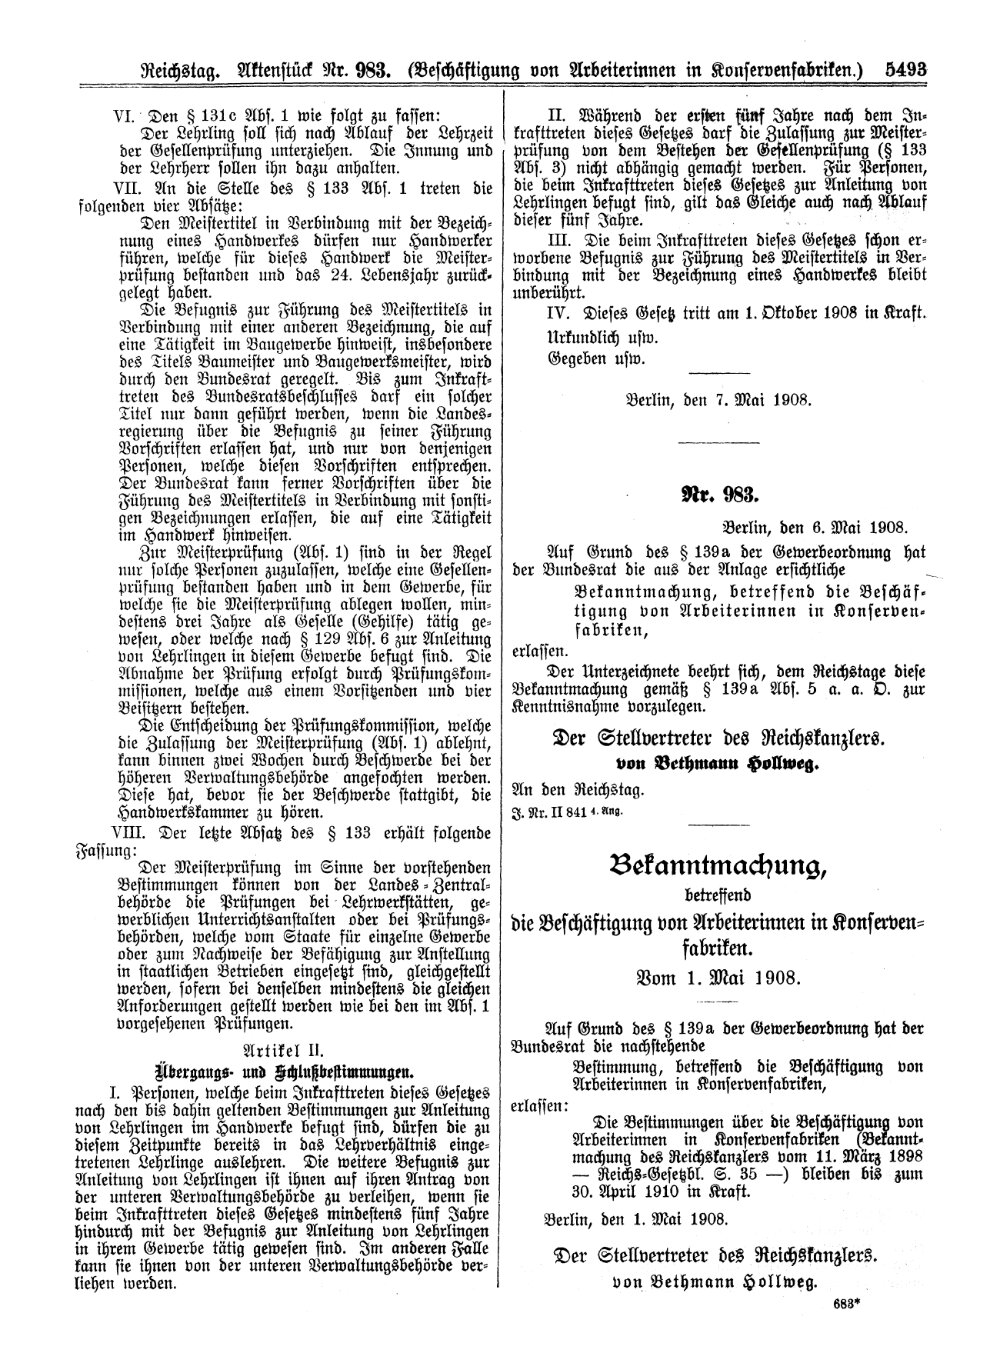 Scan of page 5493